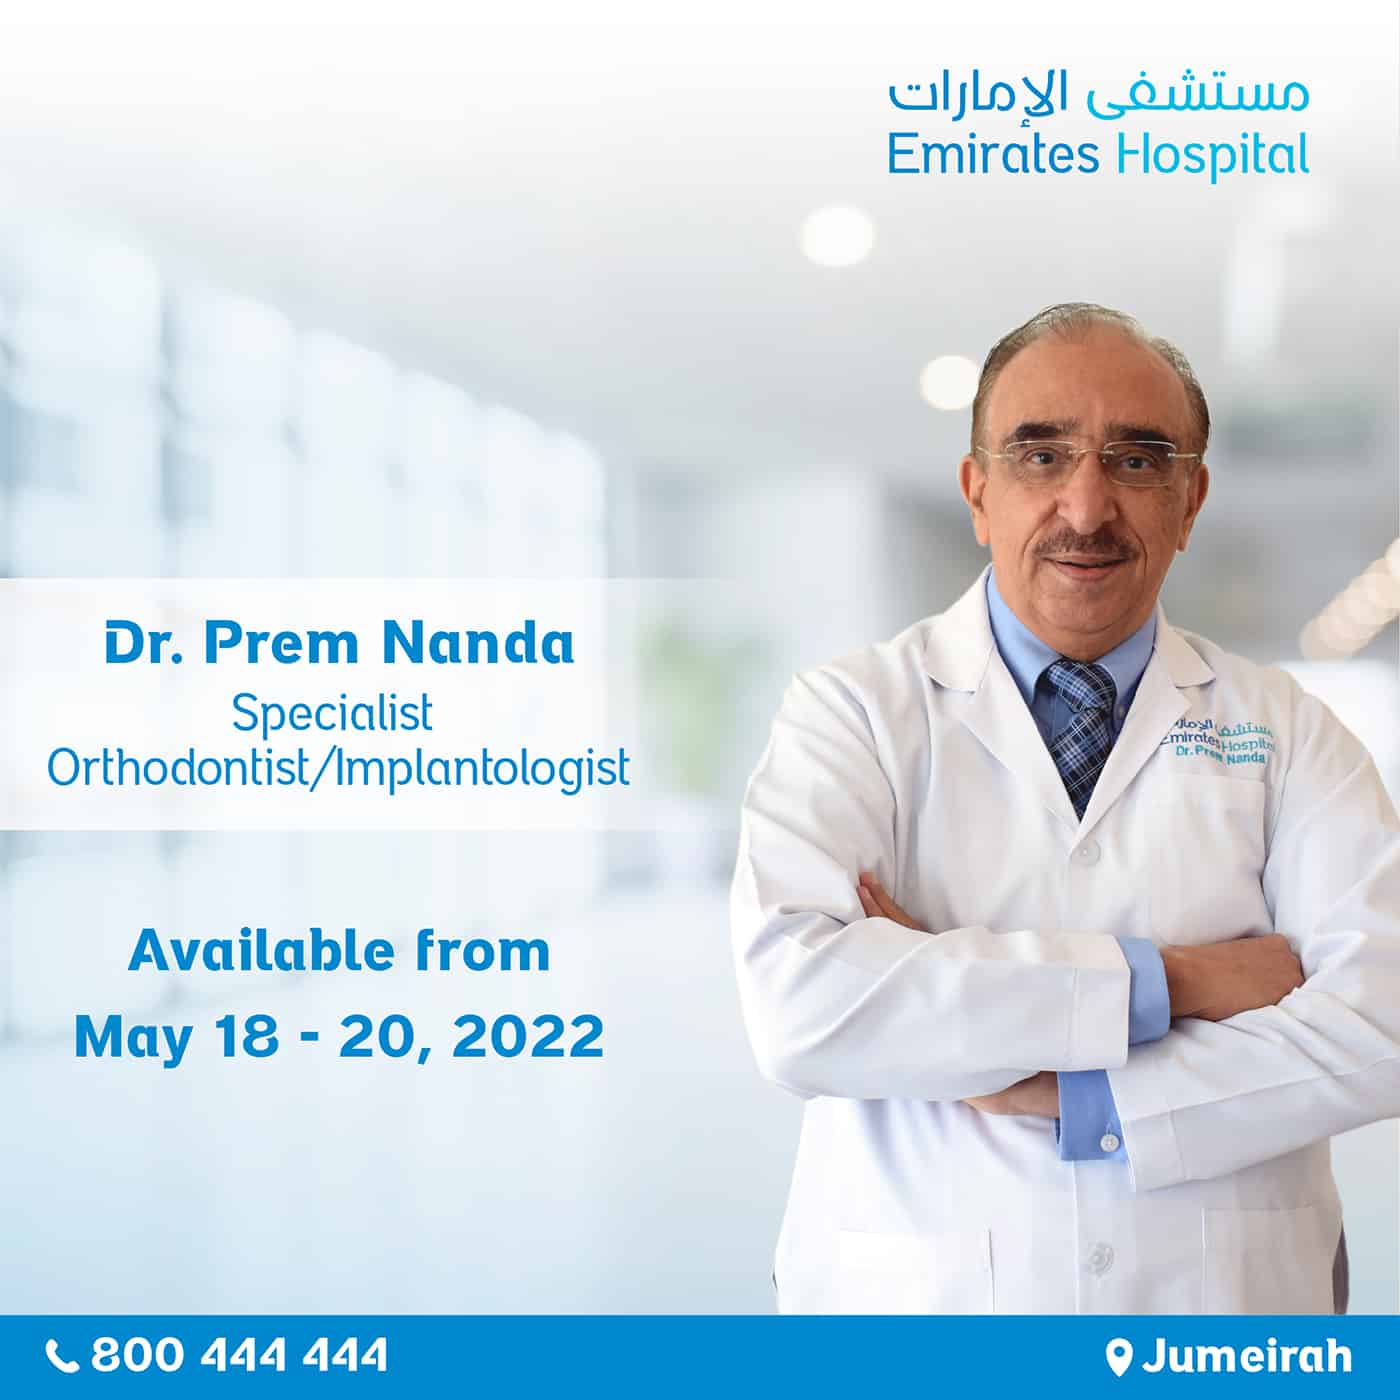 Dr. Prem Nanda Specialist Orthodontist - Implantologist will be available for consultations at Emirates Hospital, Jumeirah